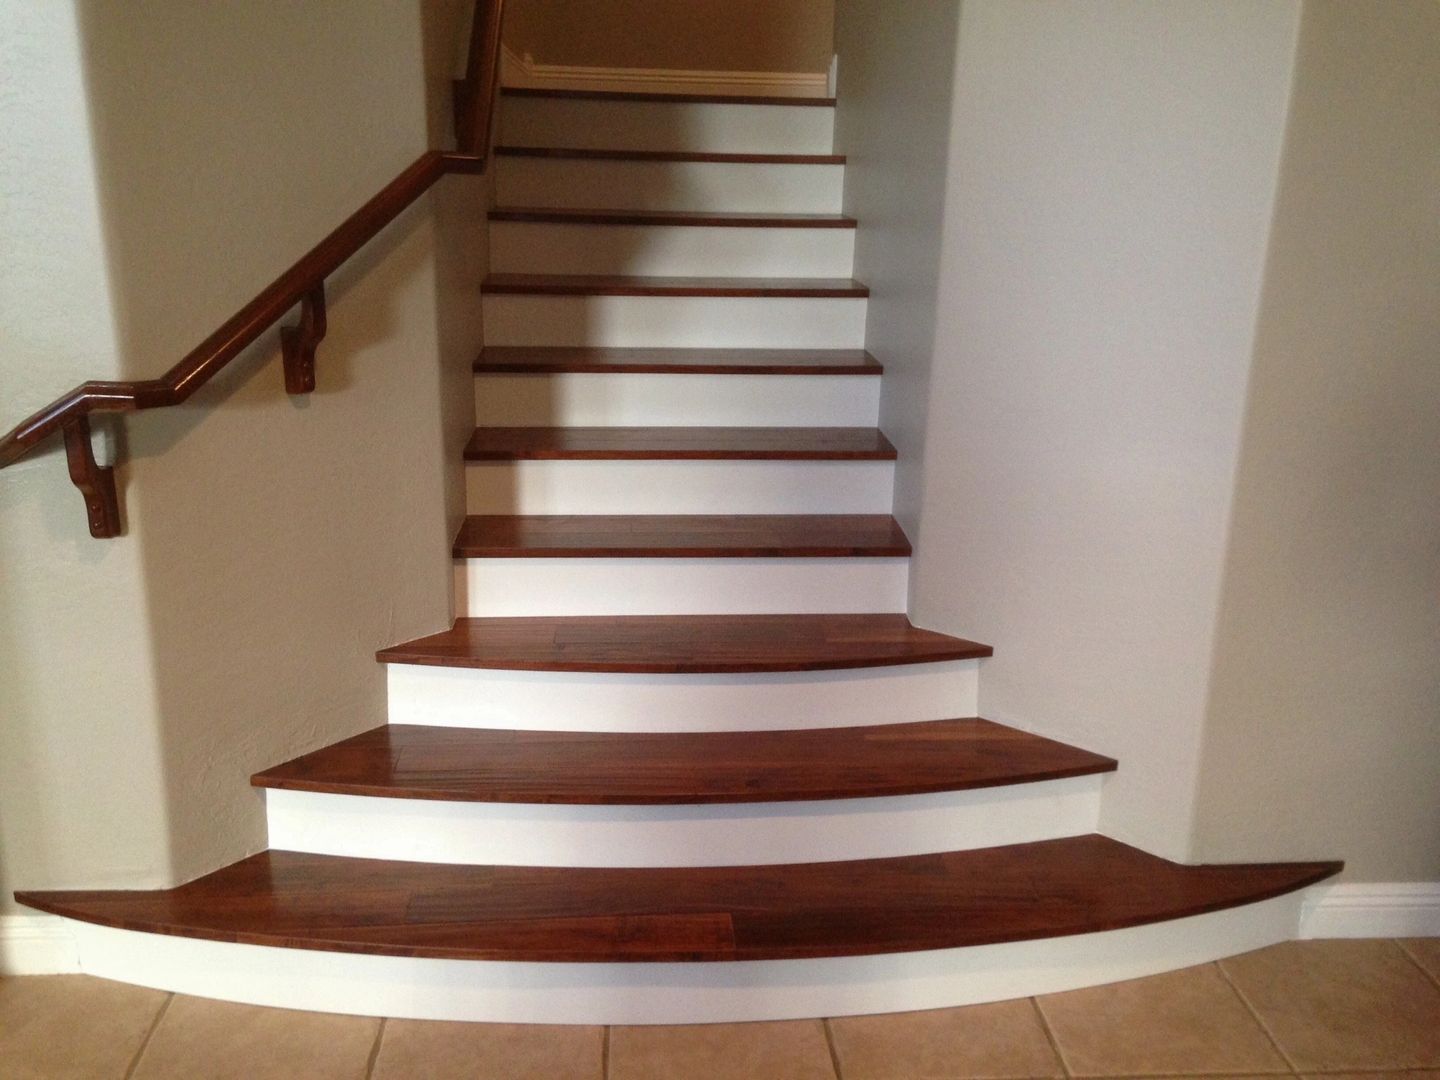 Beautiful stair work in brown and white color